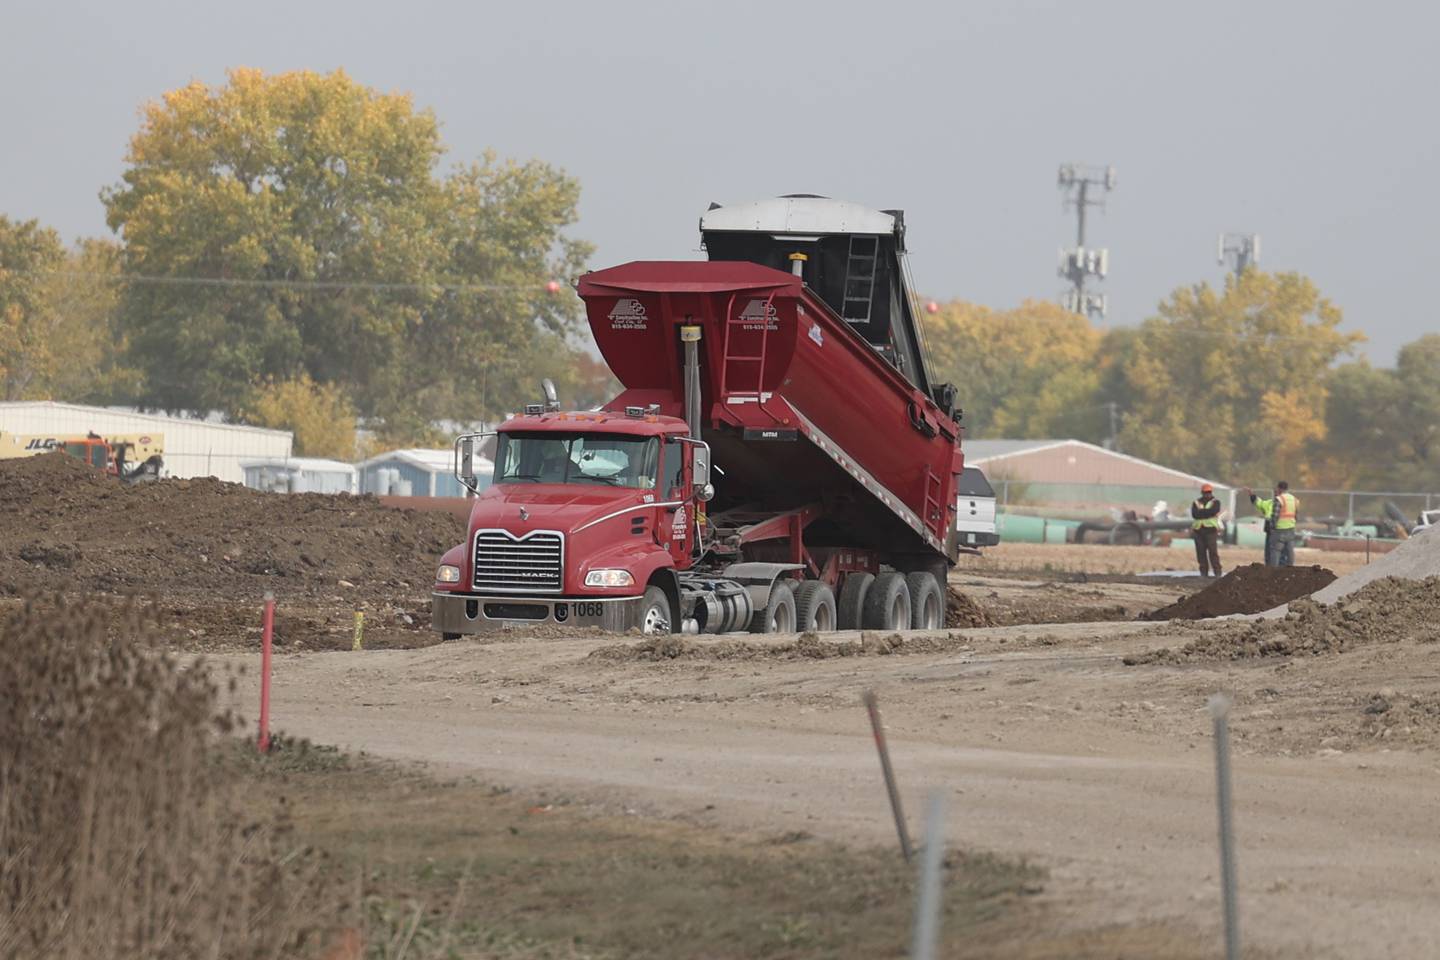 Groundwork continues on the Rock Run Crossings Development near the I-55 and I-80 interchange in Joliet on Tuesday, October 11th.